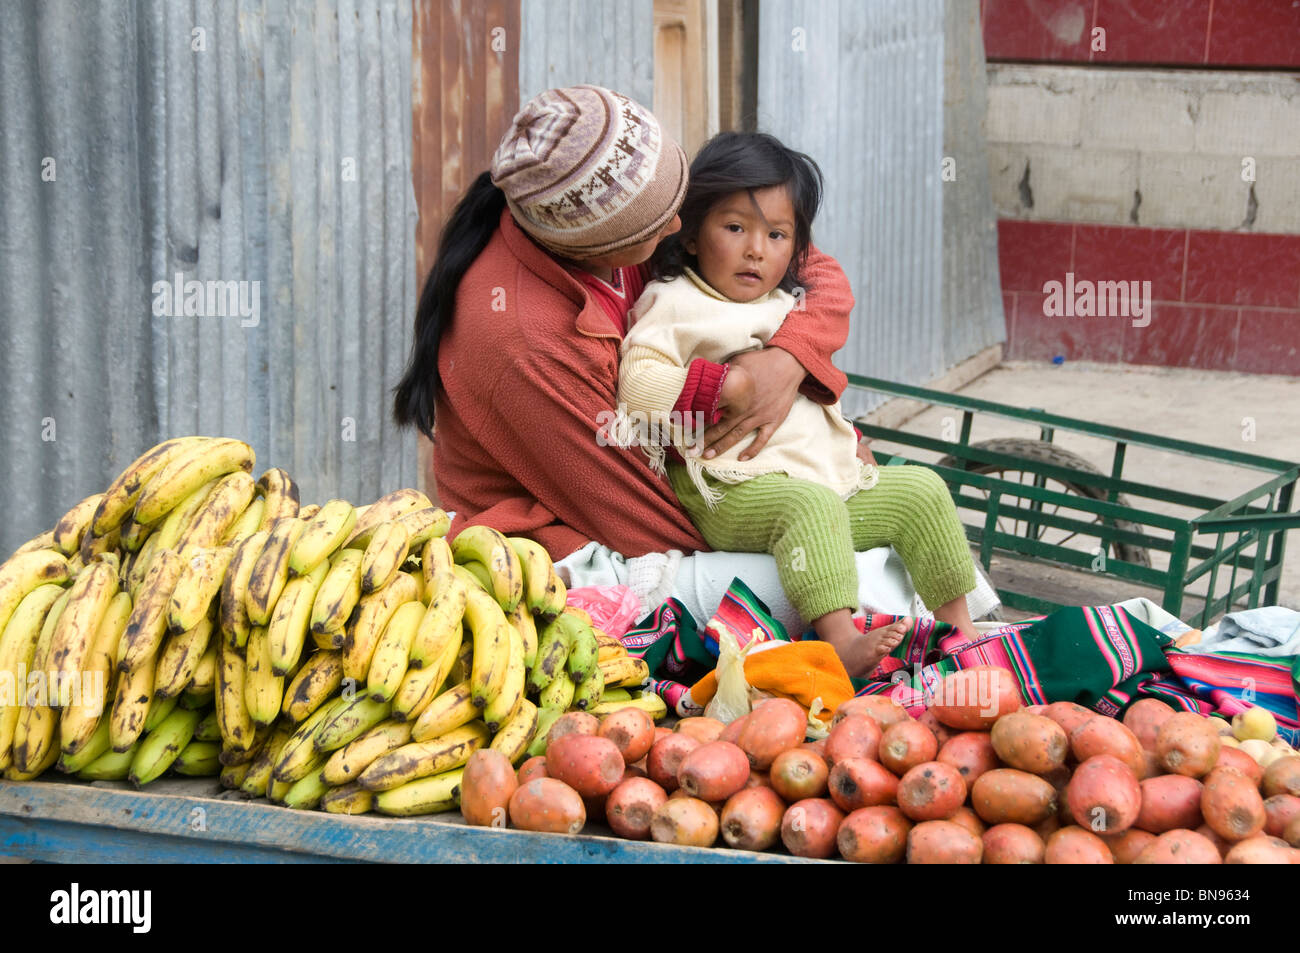 Woman looking after her child while she works on a market stall selling fruit Stock Photo